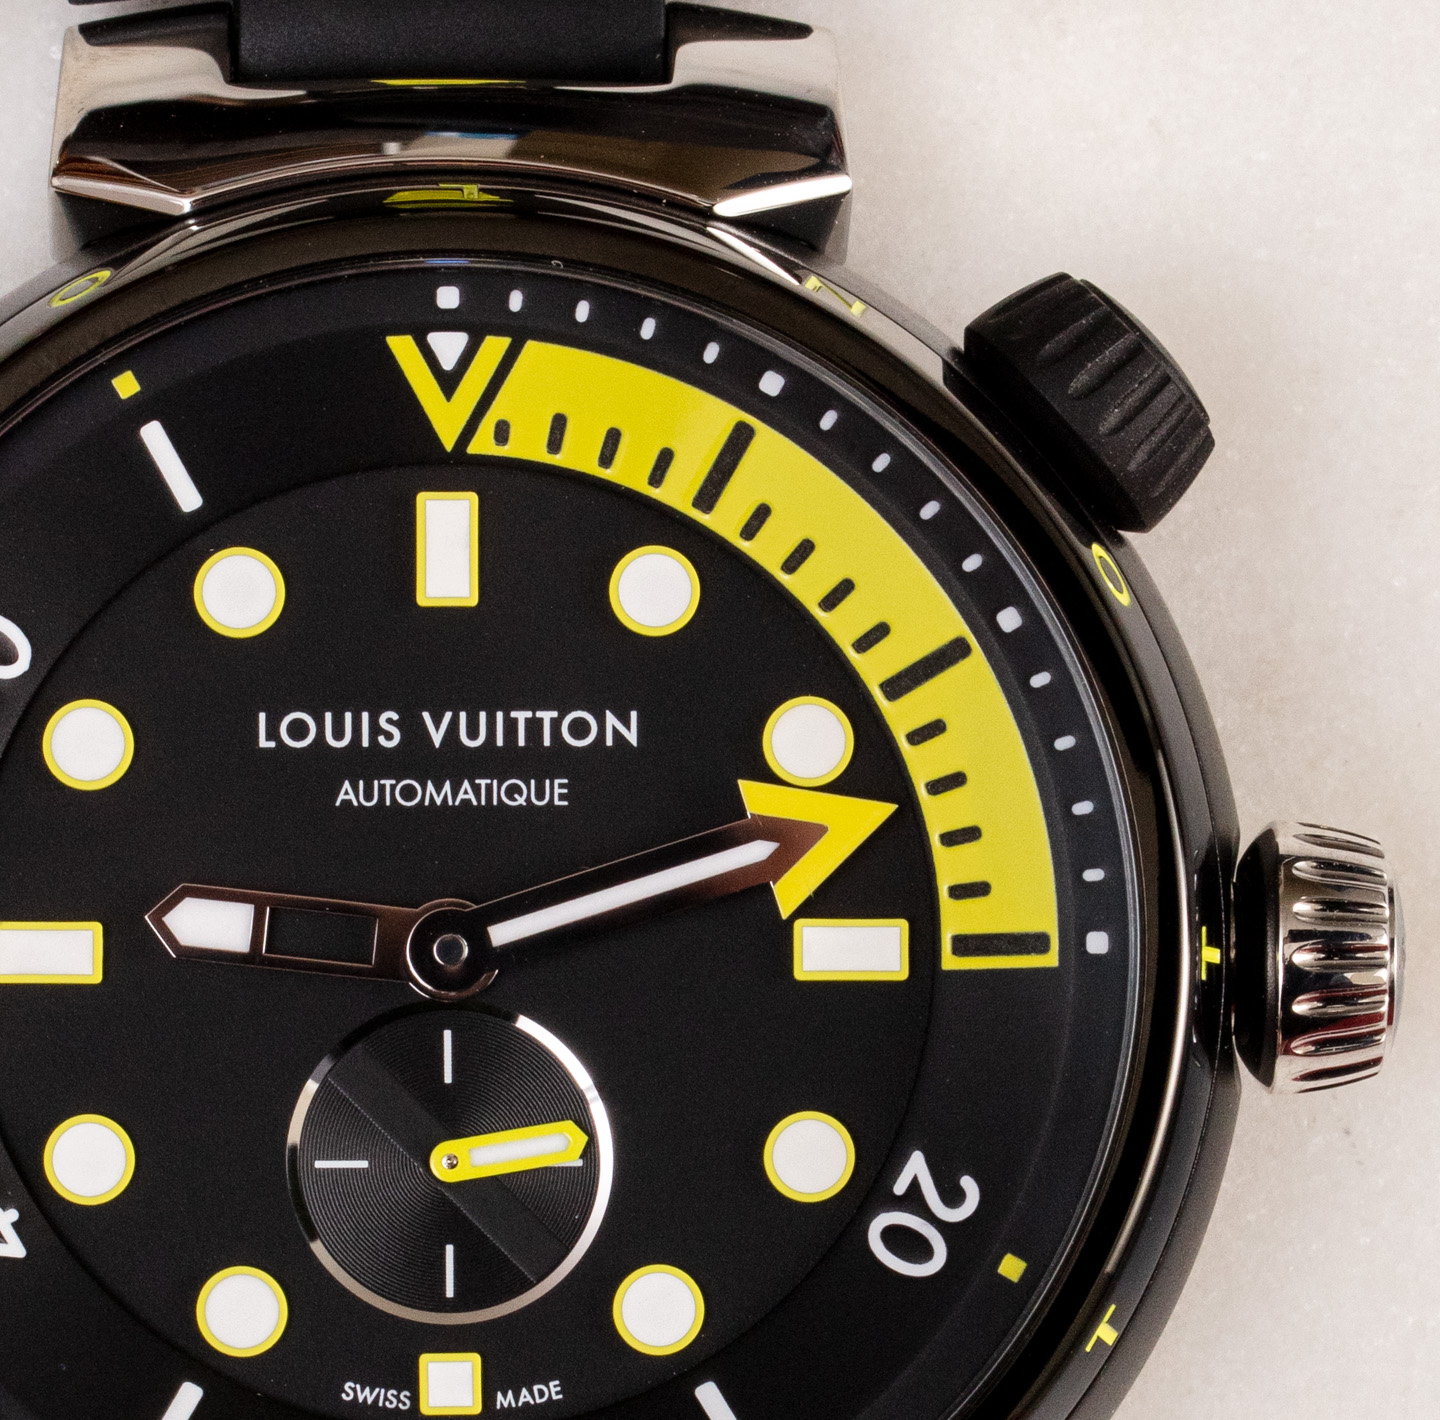 Penta on Instagram: Louis Vuitton has introduced a chronograph function to  its Tambour Street Diver collection, infusing a sporty dive model with  bold, colorful style. The original Tambour Street Diver, launched in